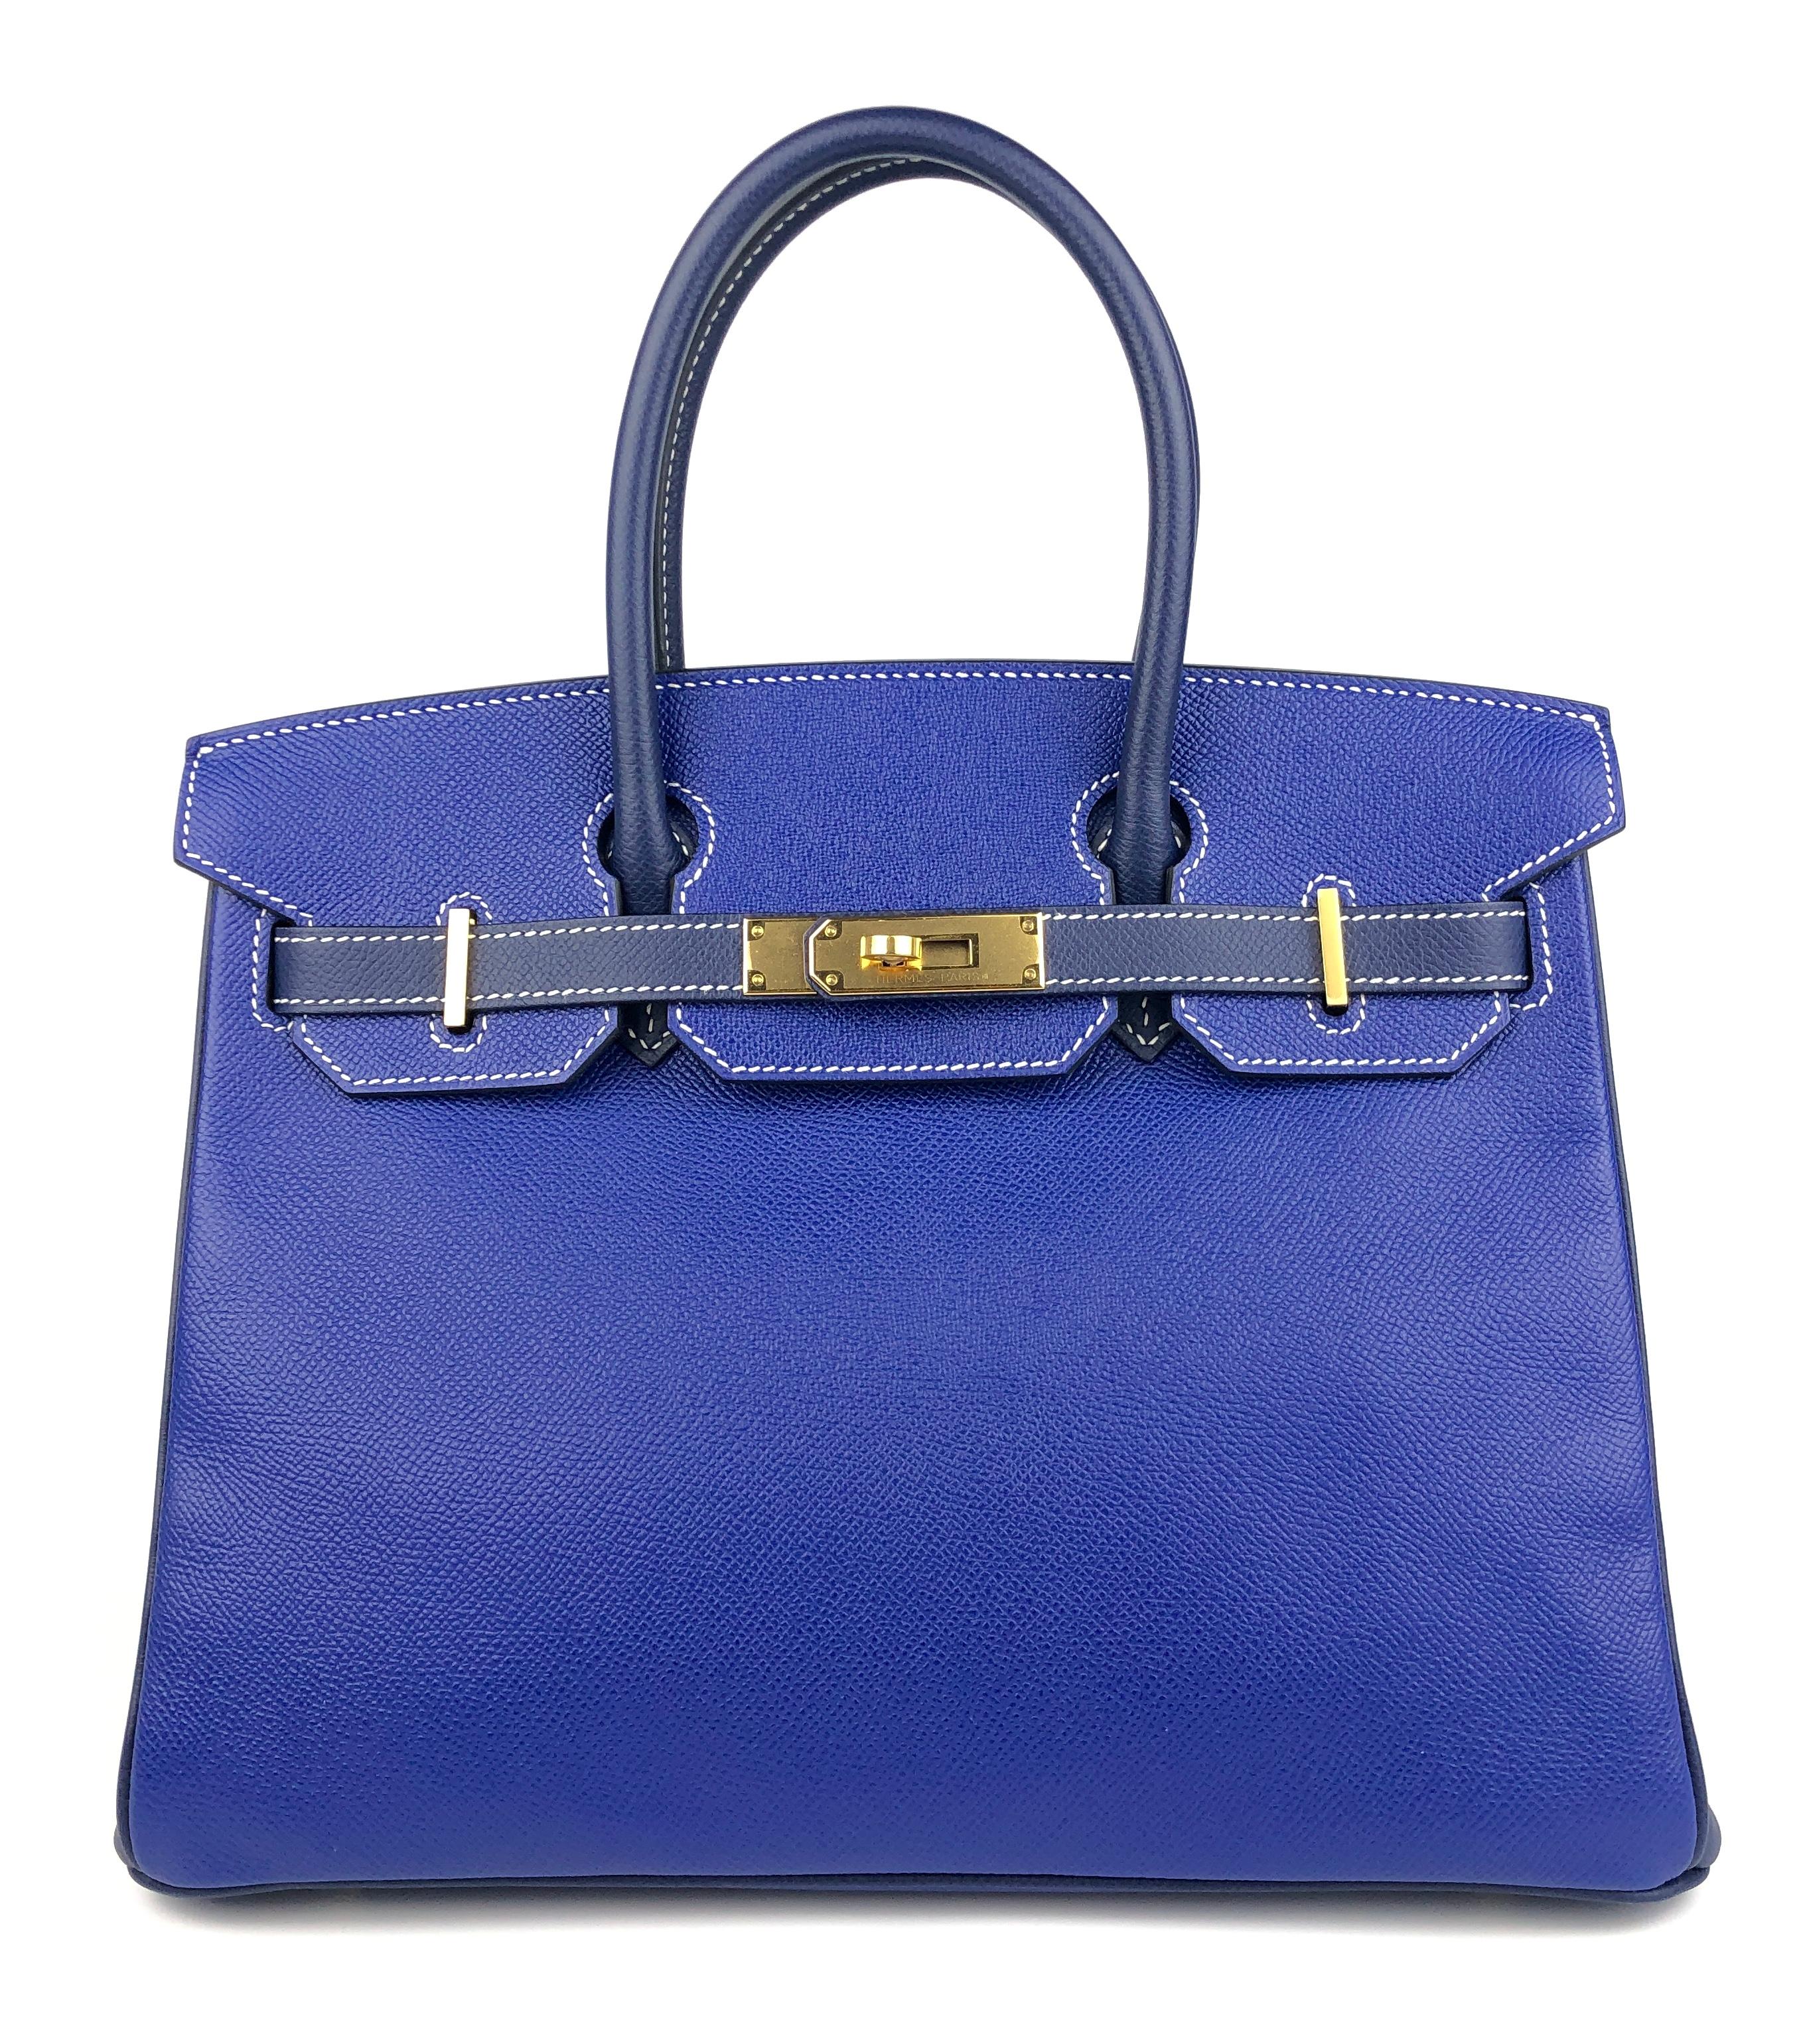 Absolutely Stunning 1 of 1 HSS Hermes Birkin 30 Special Order Blue Electric & Blue Sapphire Epsom Leather complimented by Gold Hardware. Pristine Condition with Plastic on Hardware. 

Shop with Confidence from Lux Addicts. Authenticity Guaranteed! 